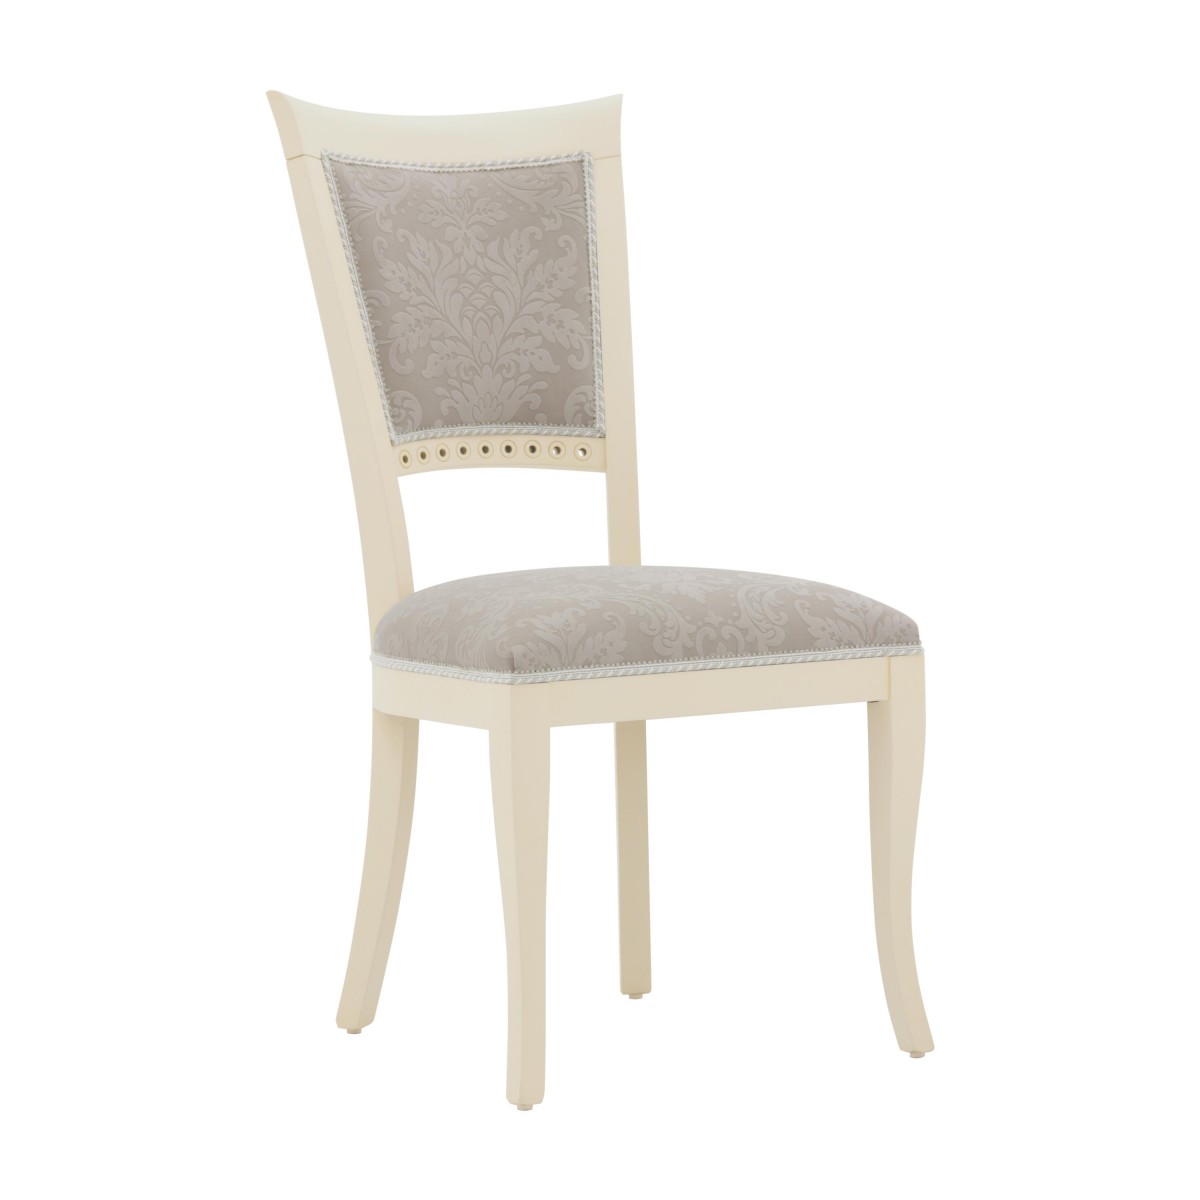 Classic chair Modigliani by Sevensedie with beech wood frame, elegant padded backrest, upholstered in damask fabric